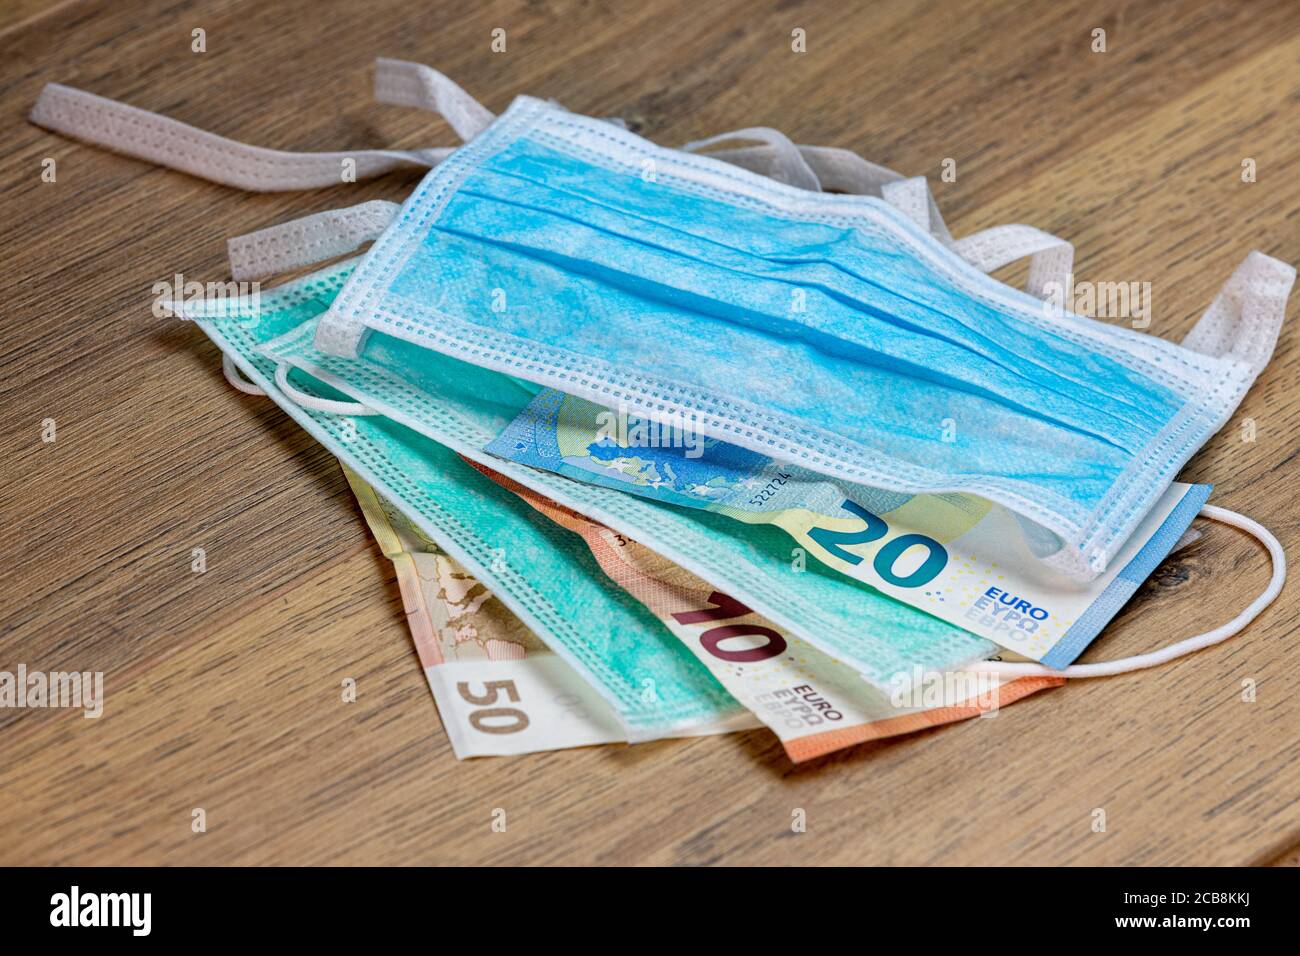 covid-19 epidemic speculation concept, stack of masks and money Stock Photo